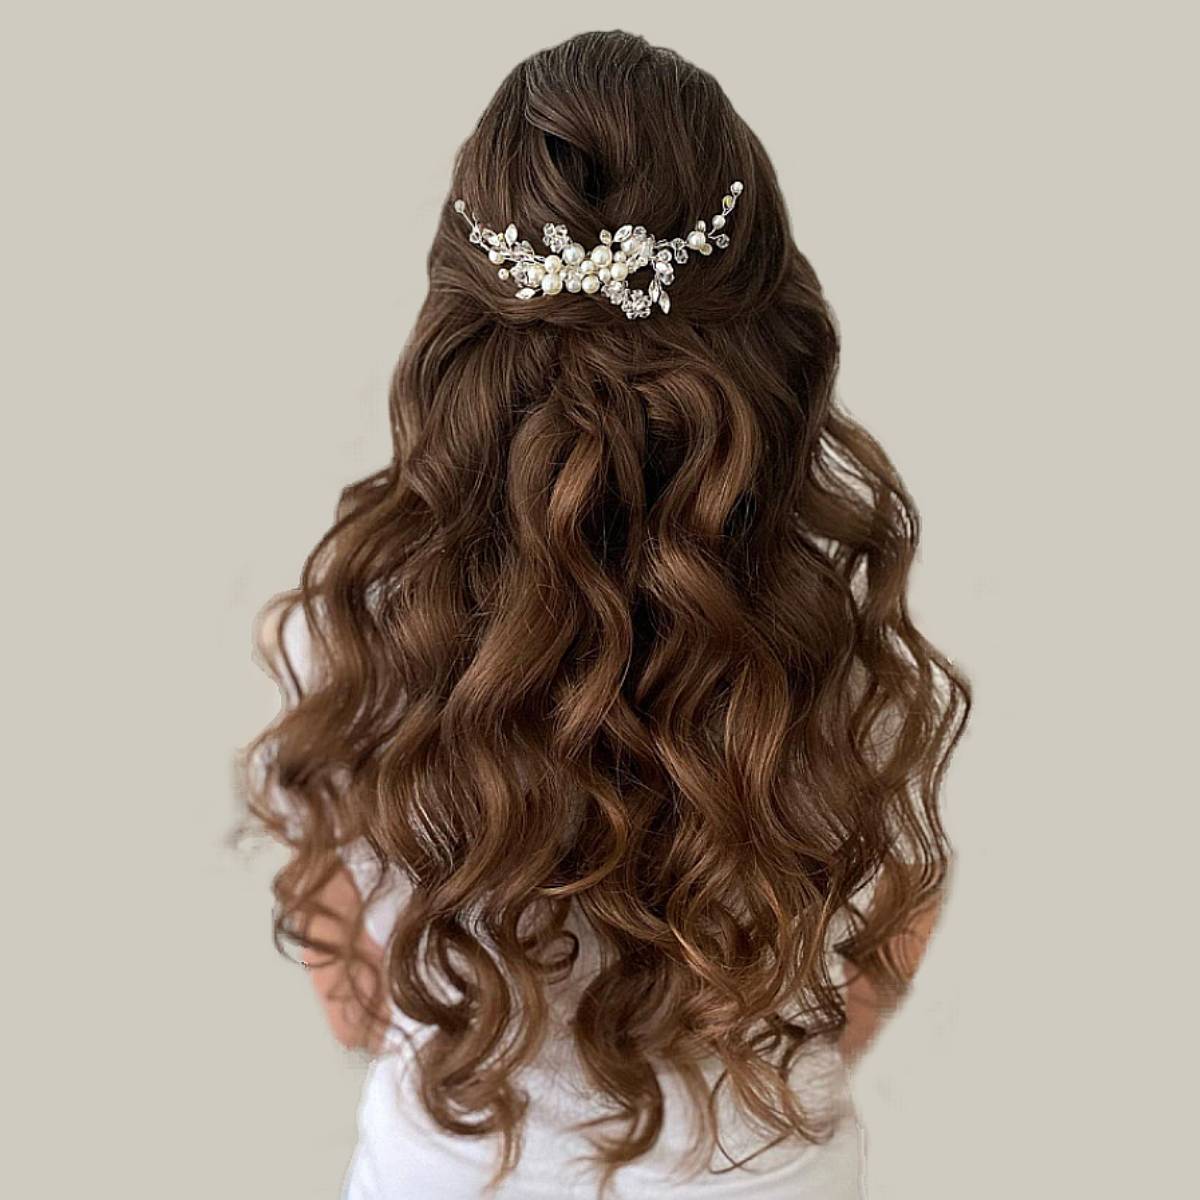 15 Latest and Cute Long Curly Hairstyles for Women